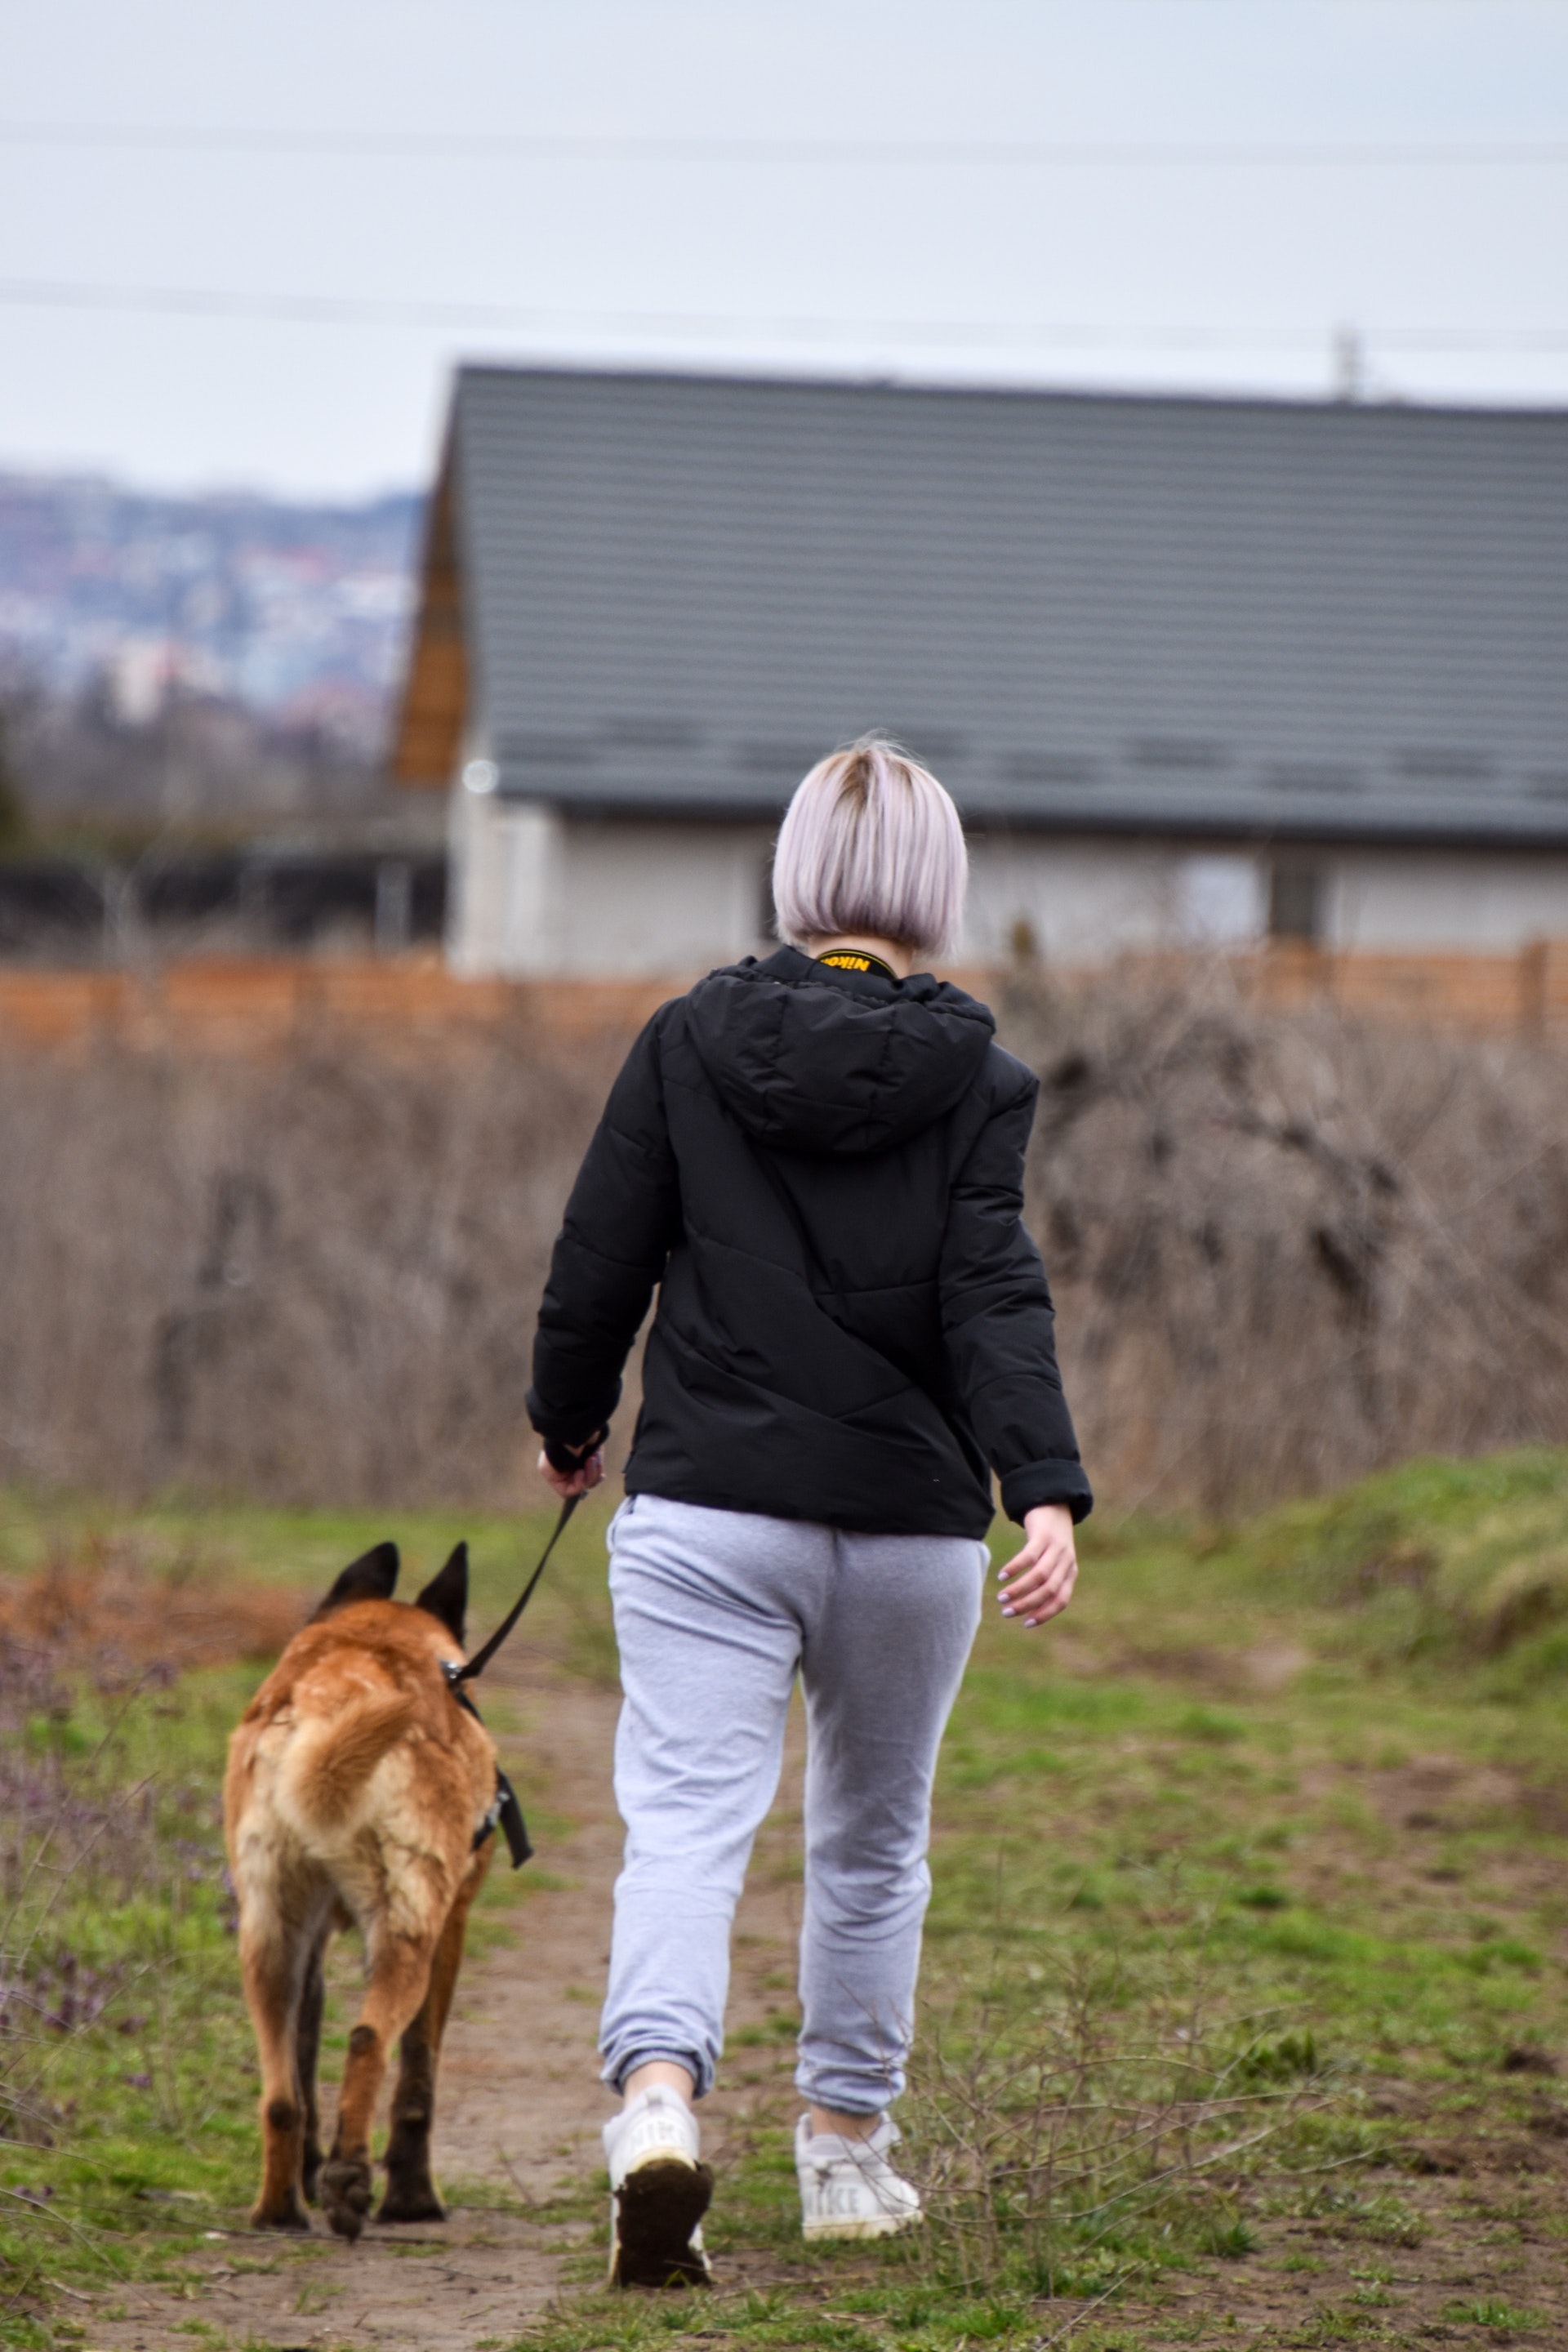 A short-haired woman in the black shirt is holding a brown dog and walking